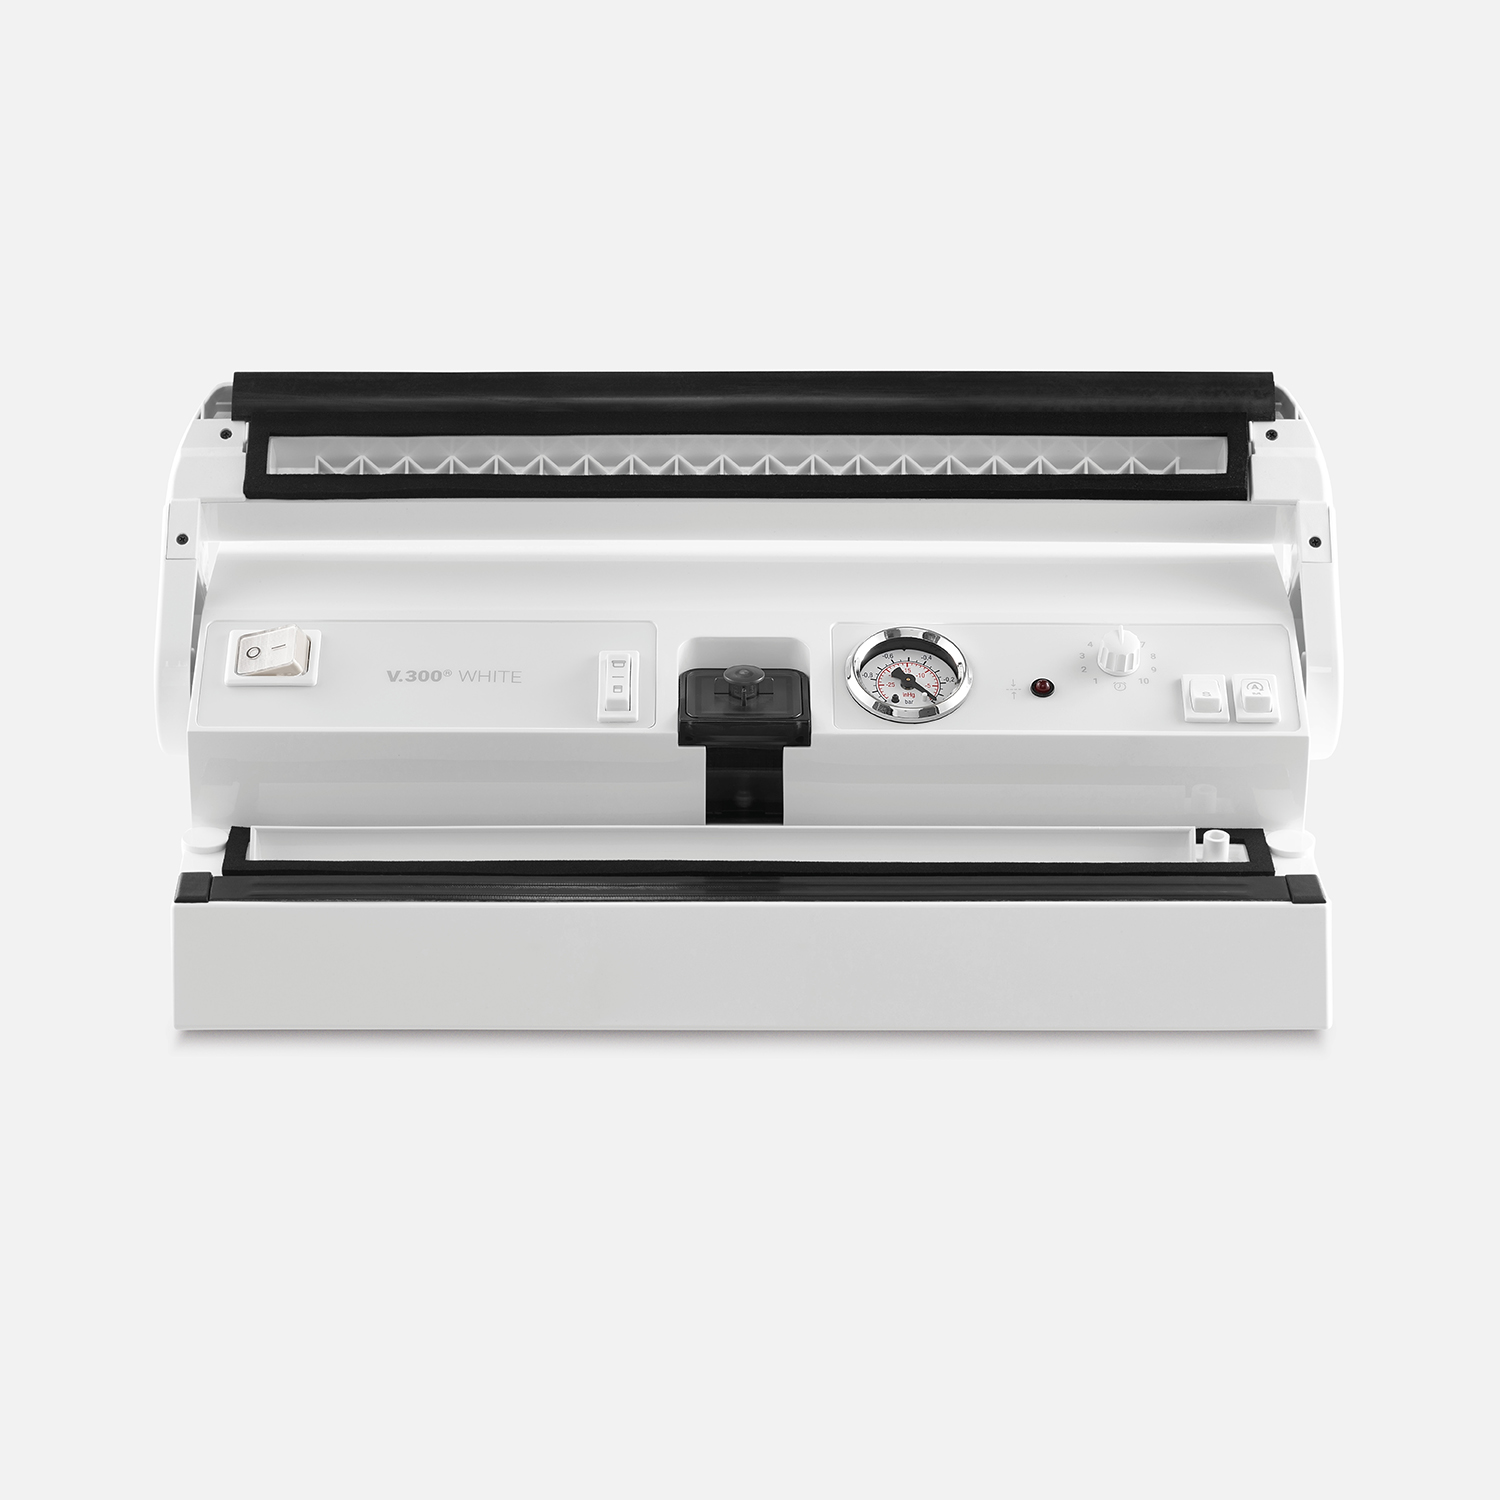 V.300 White vacuum sealer with open device flap